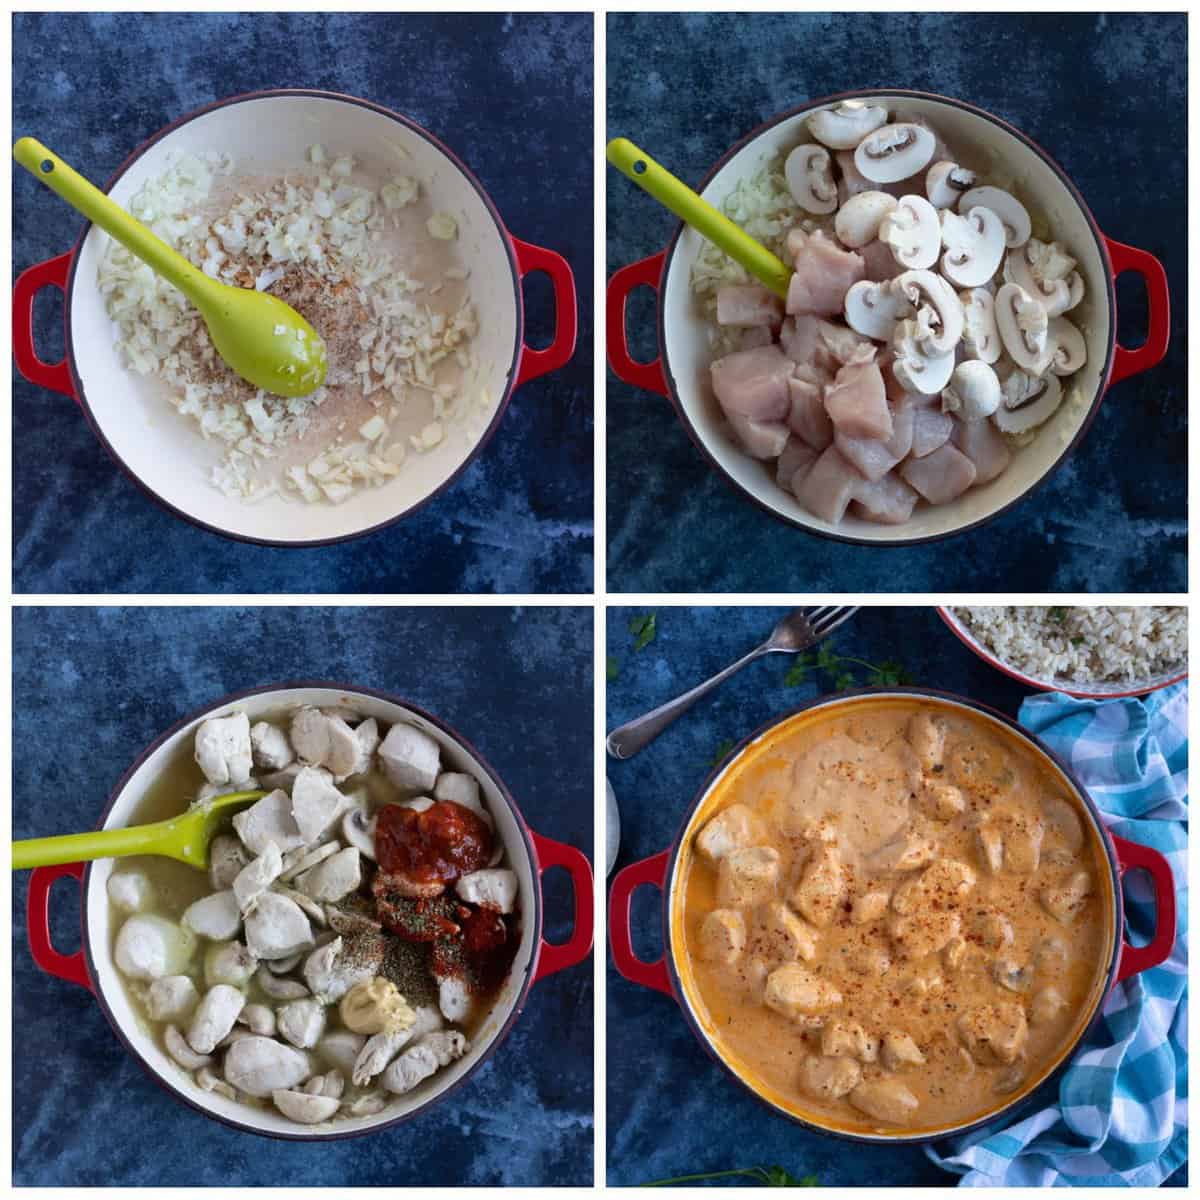 Step by step photo instruction collage for making chicken and mushroom stroganoff.